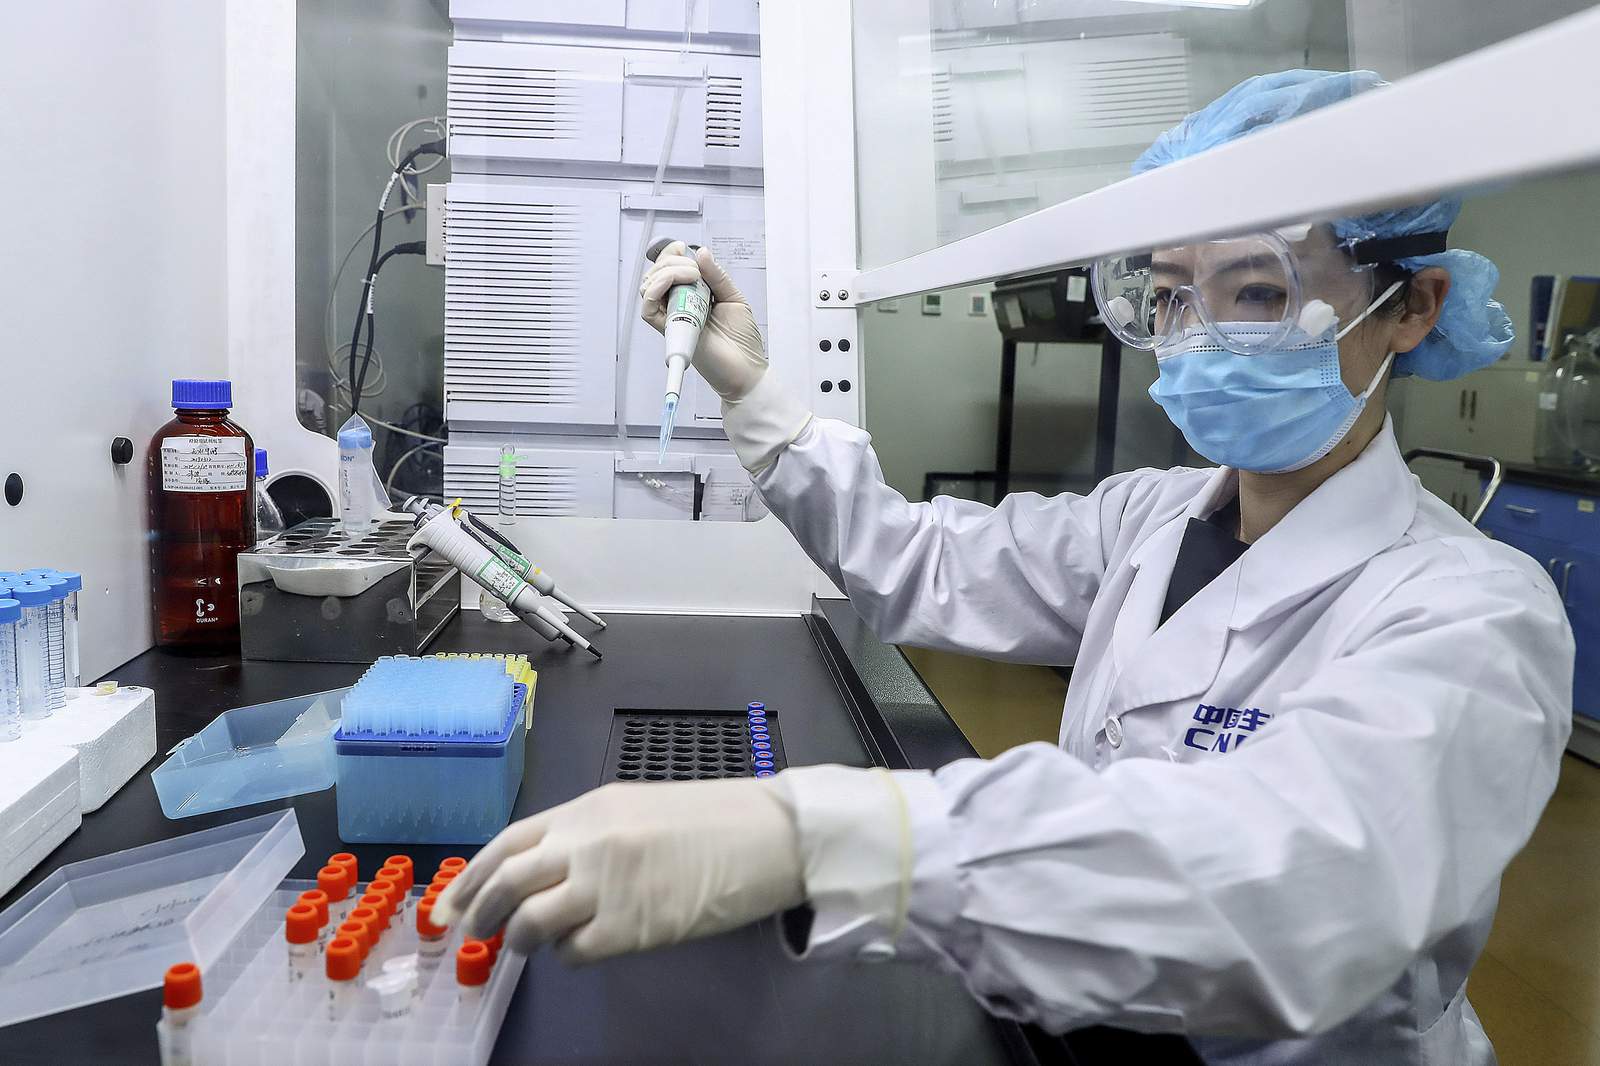 China firm uses workers to 'pre-test' vaccine in global race